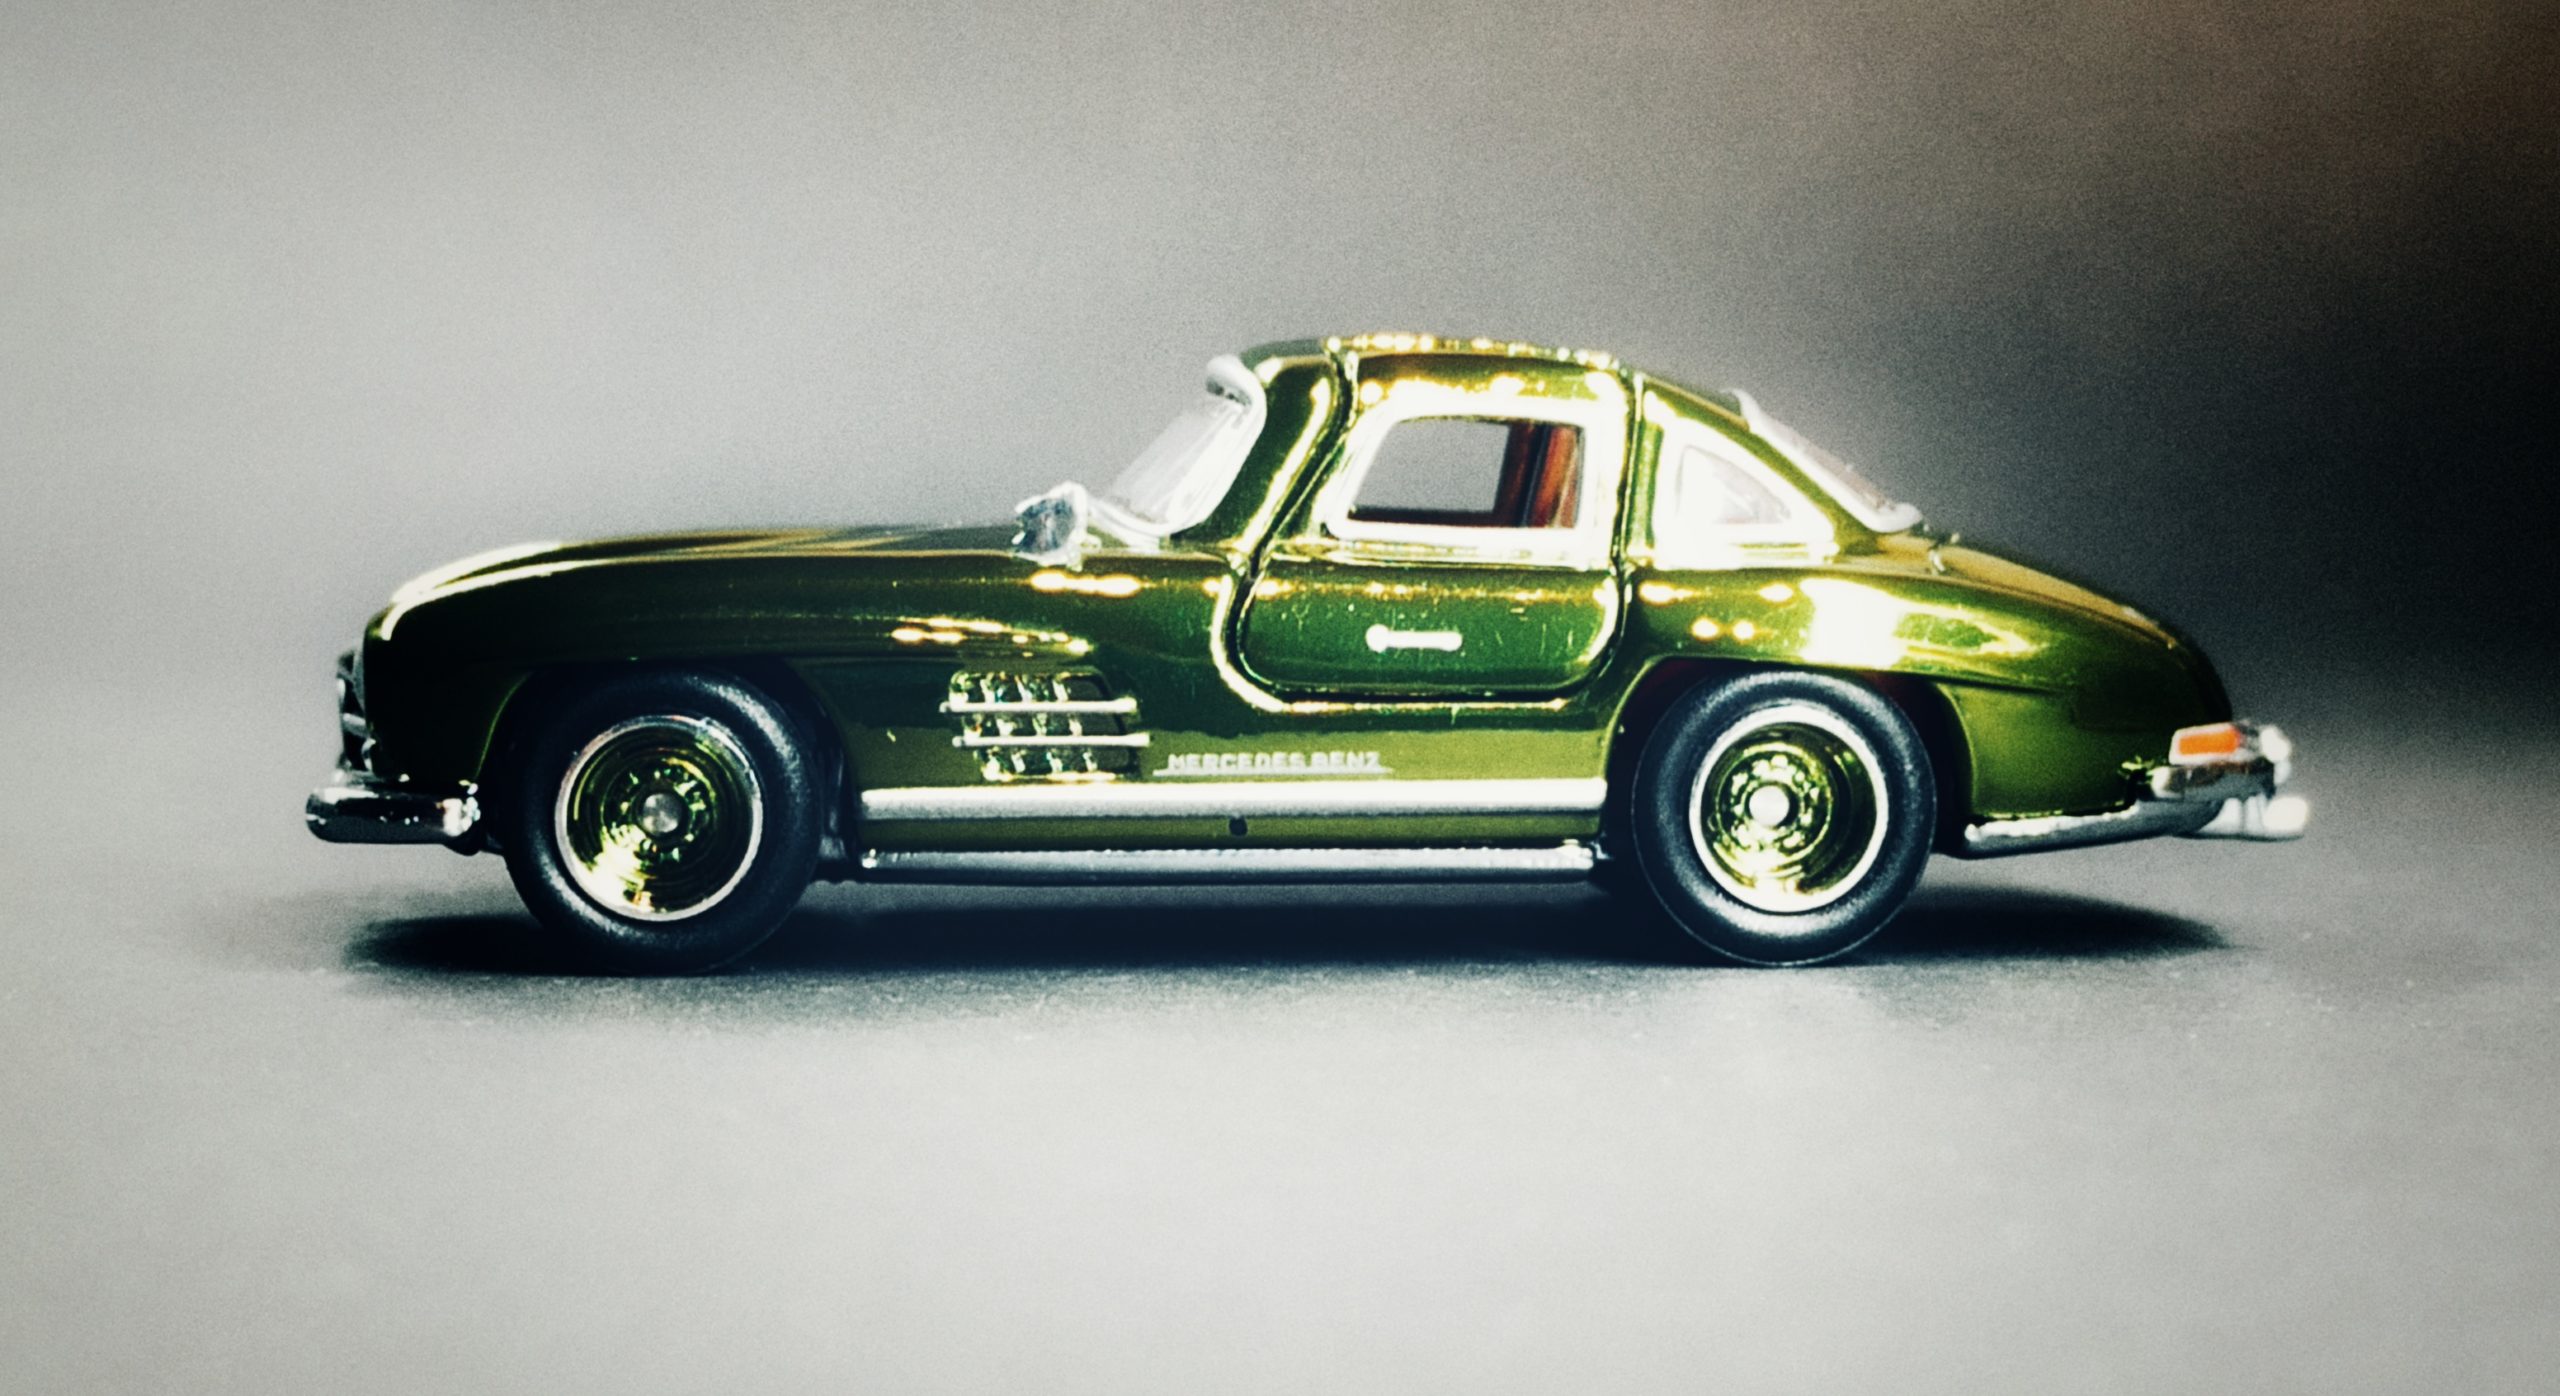 Hot Wheels '55 Mercedes-Benz 300 SL (GDF83) 2019 RLC Exclusive (1 of 12.500) spectraflame green side angle